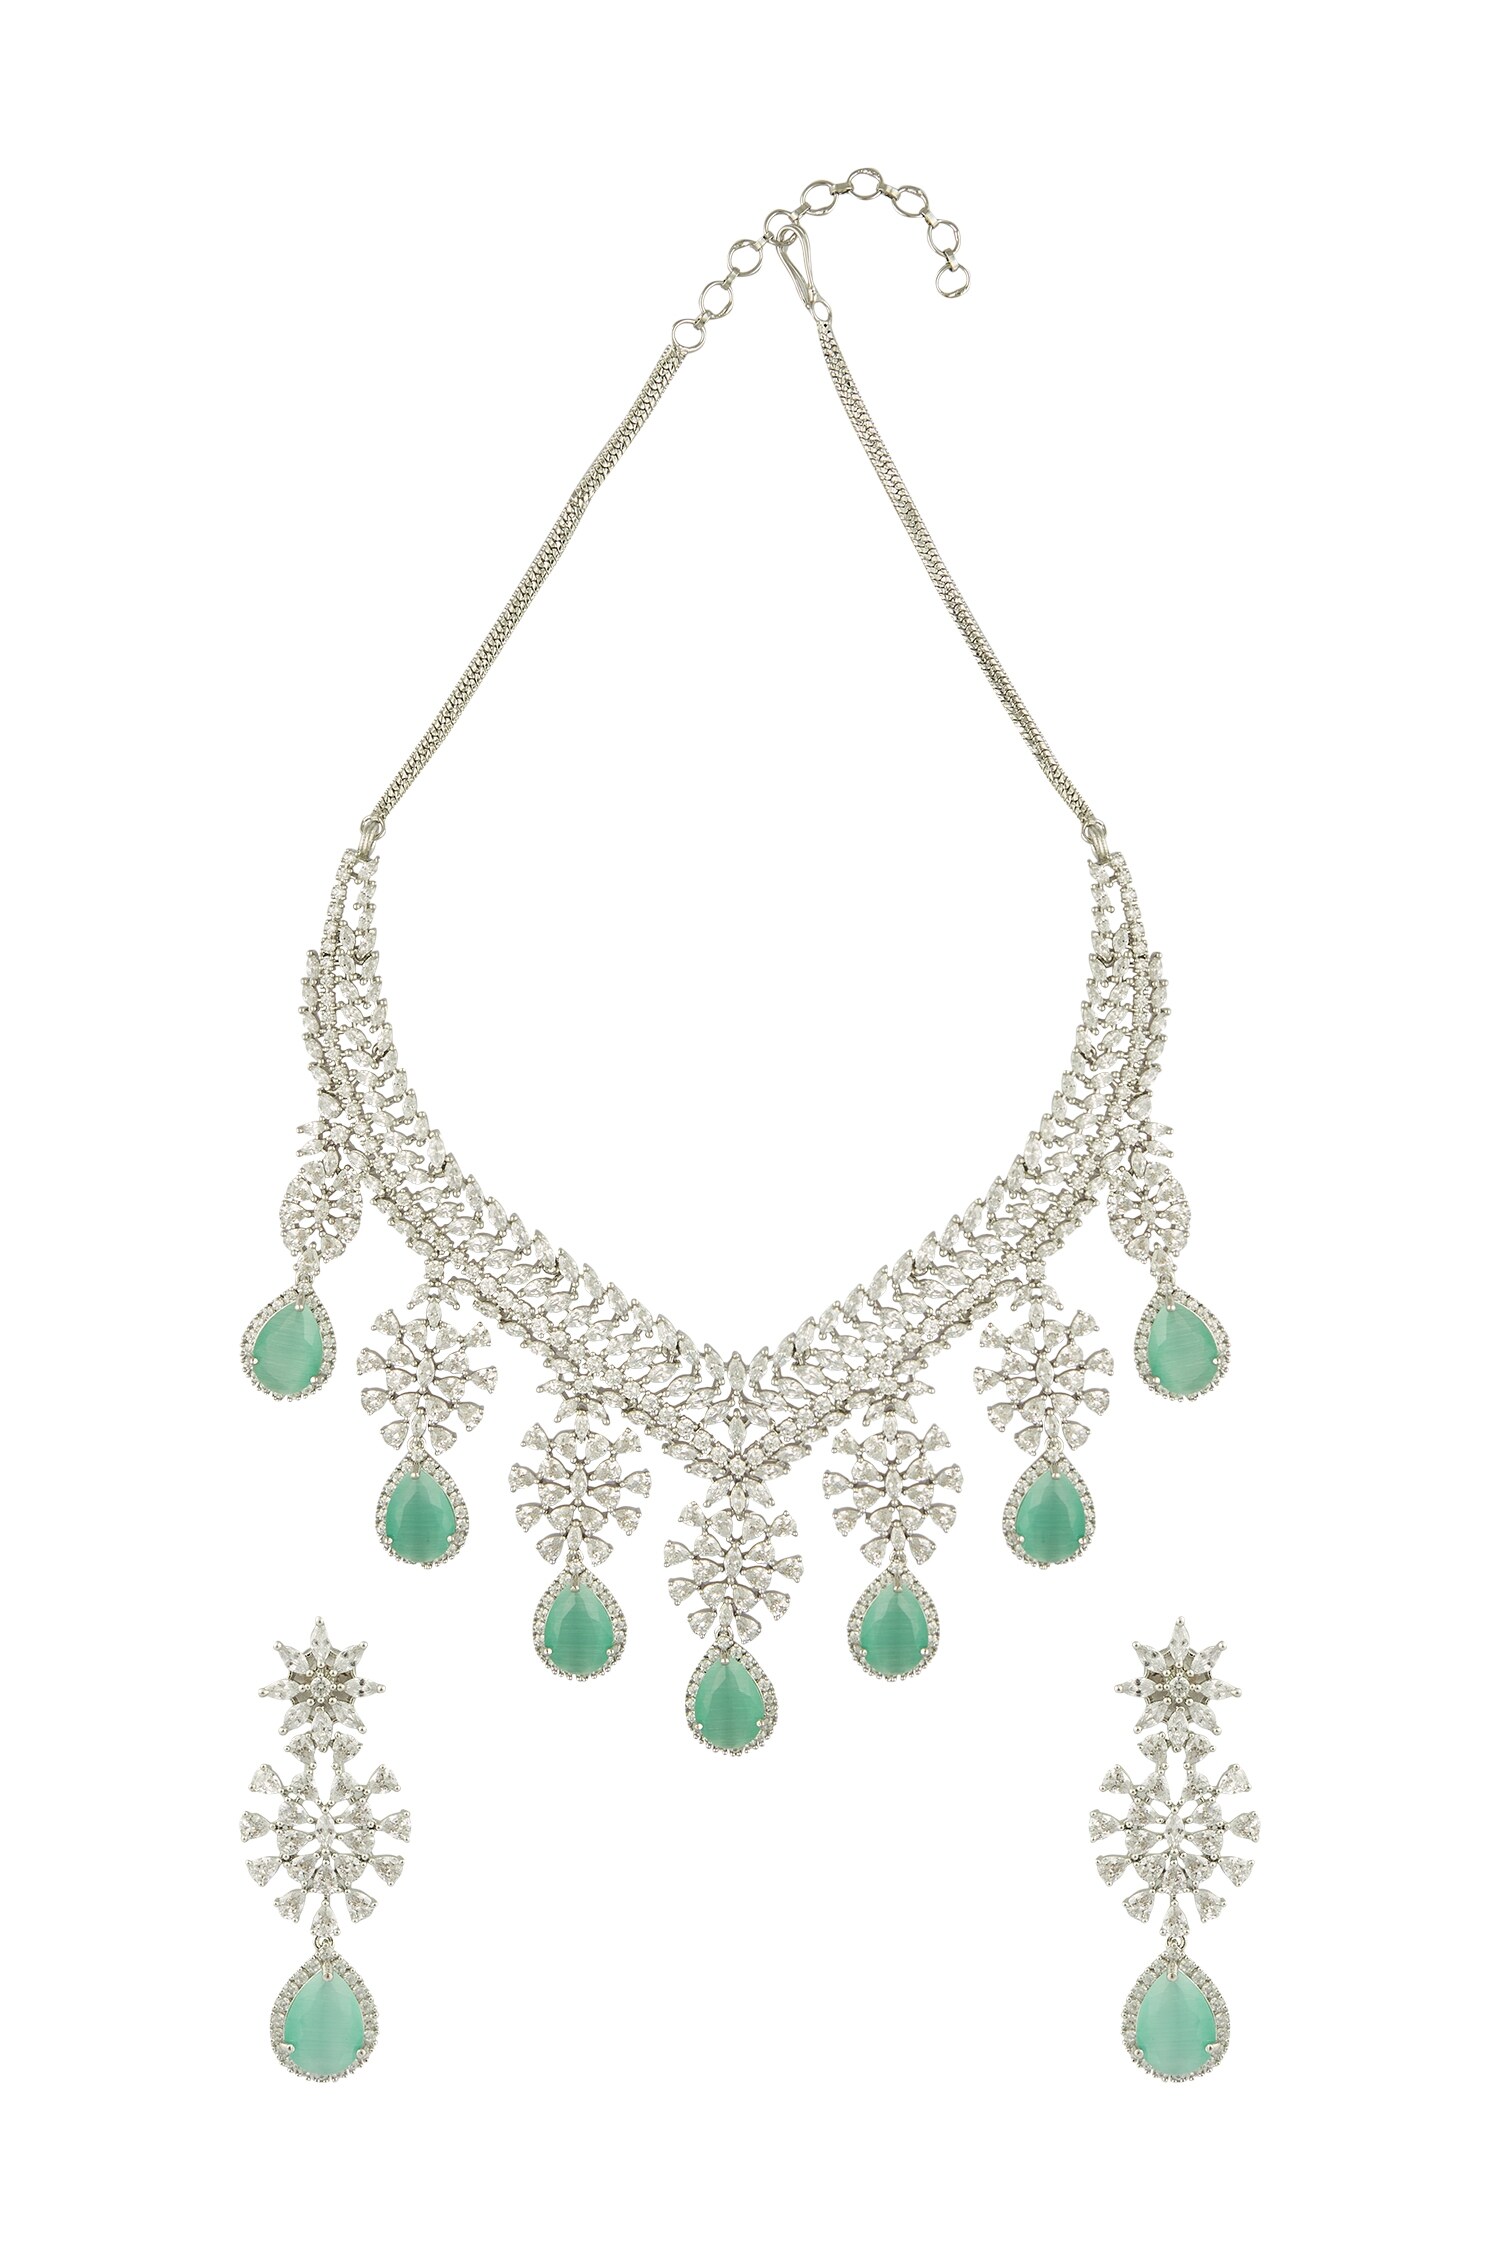 Chaotiq By Arti Handcrafted Floral Drop Necklace Jewellery Set